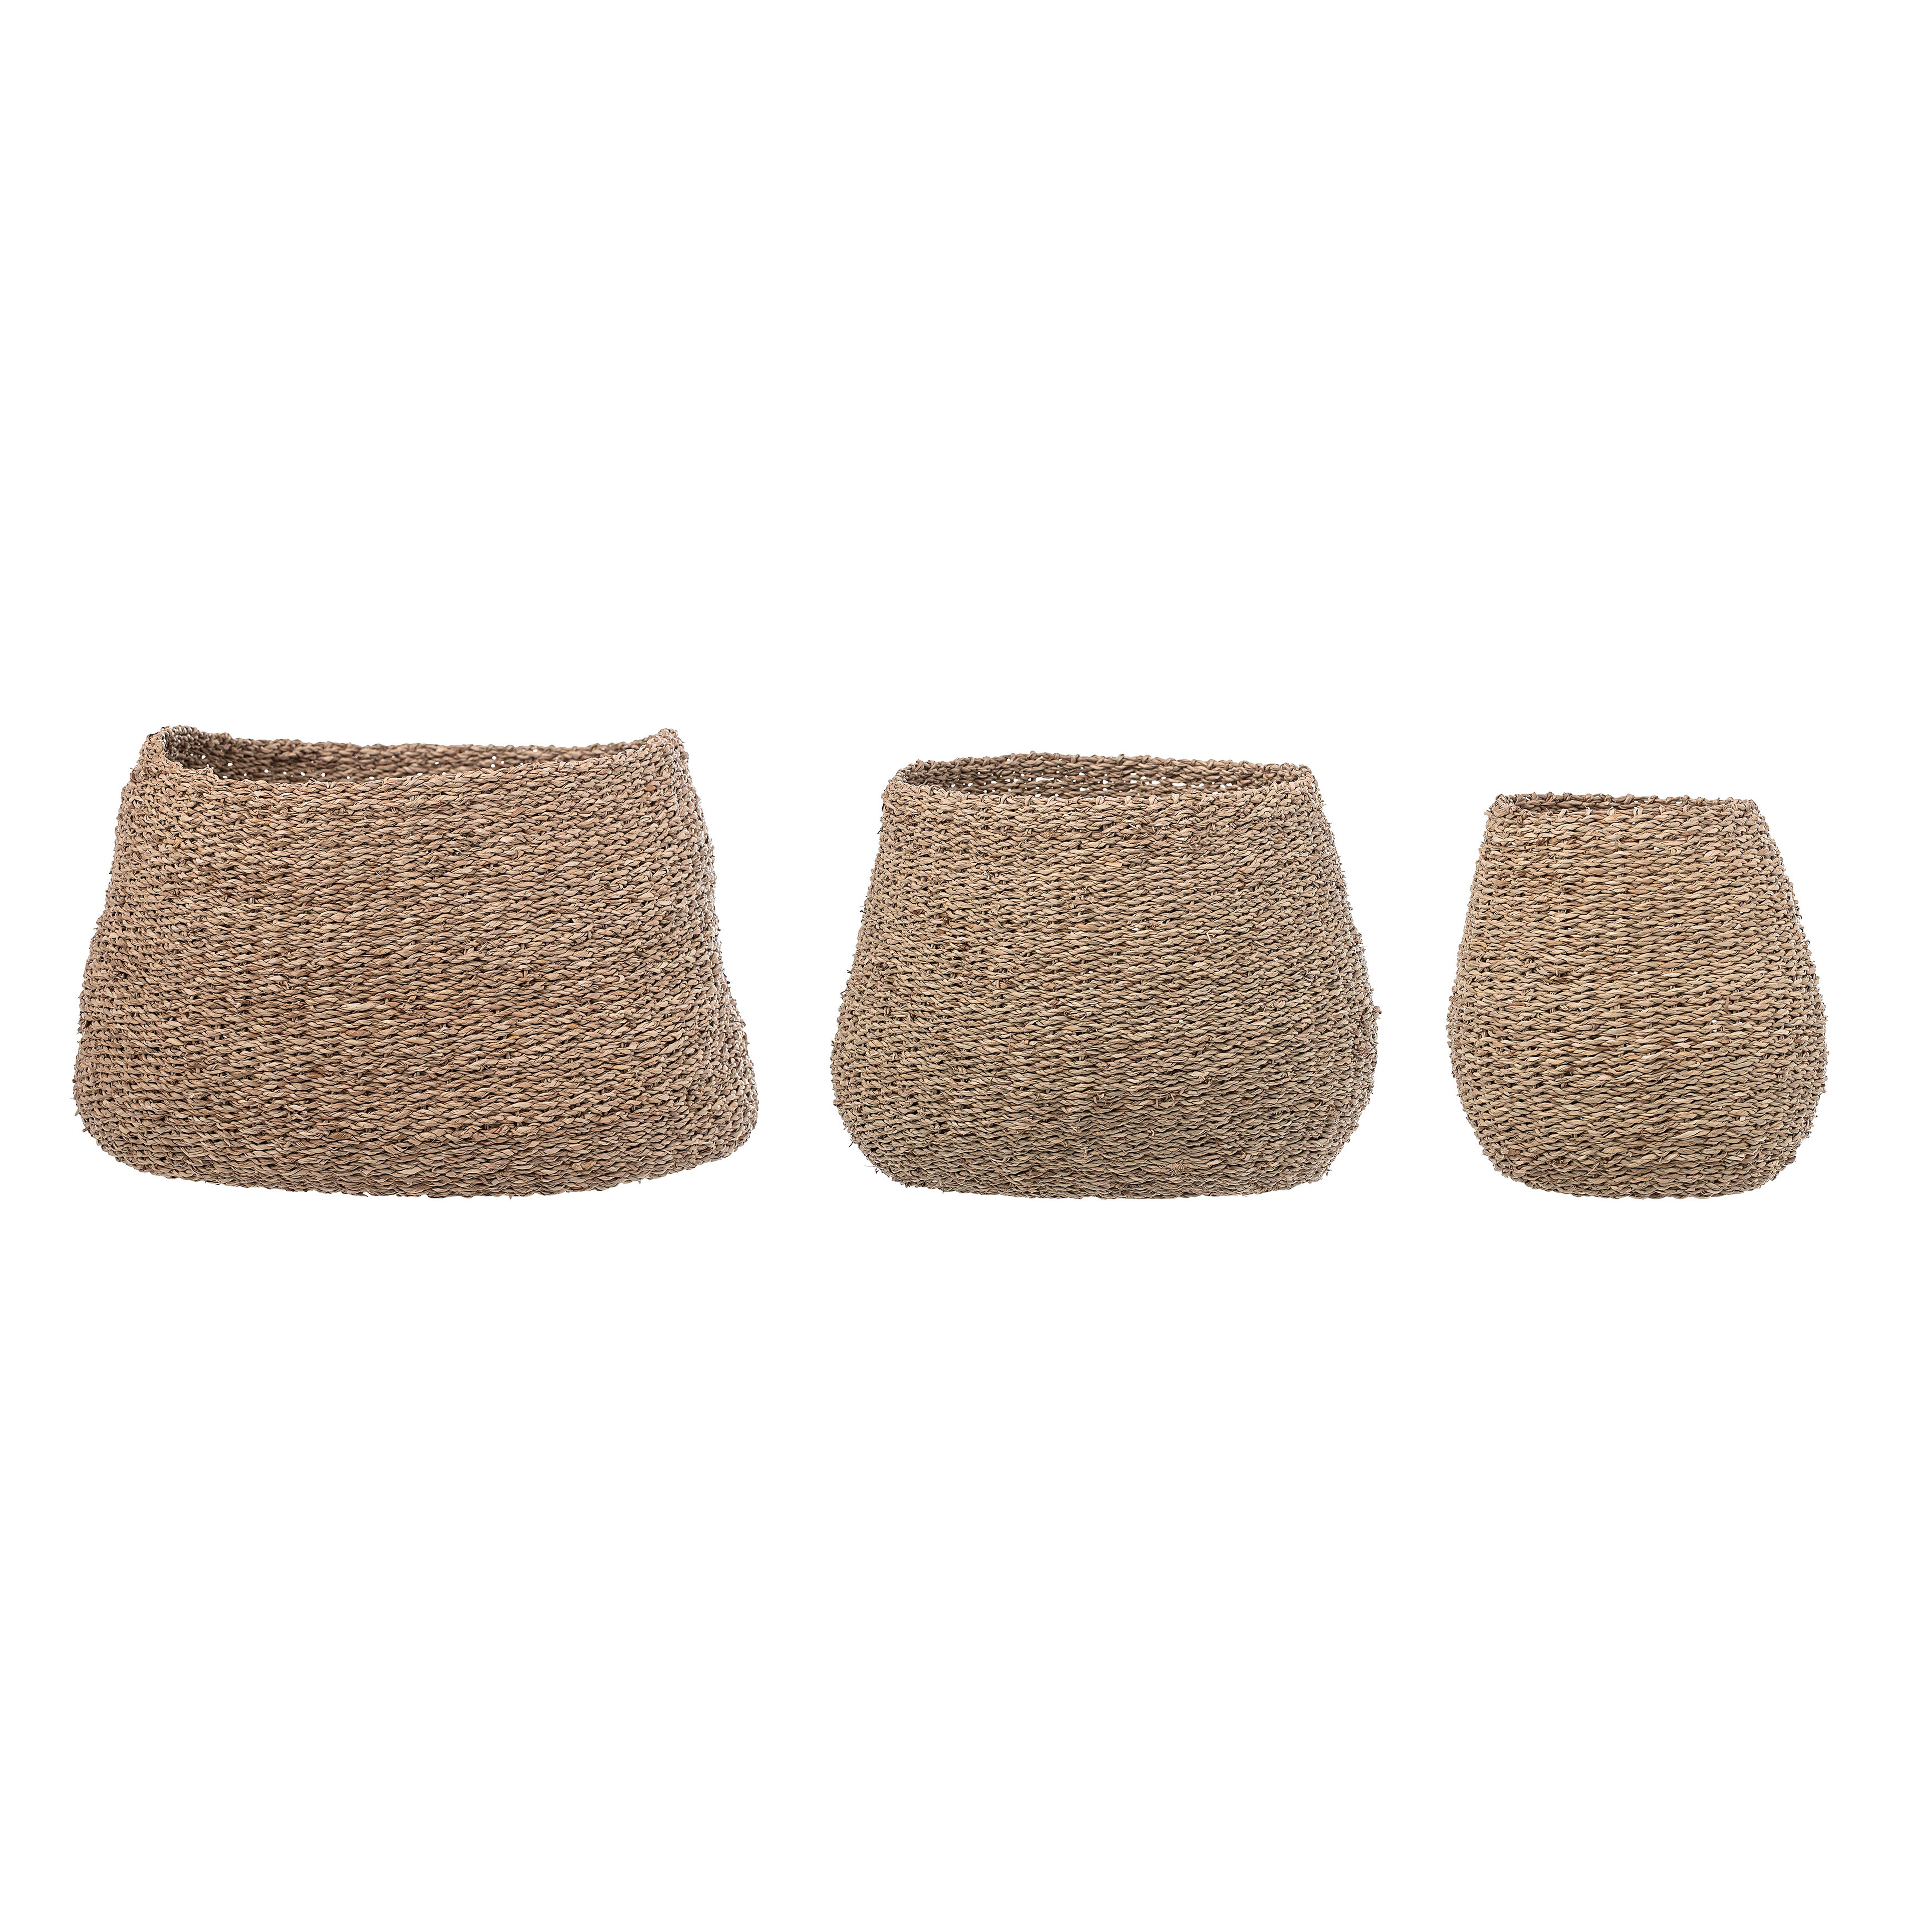 Brown Natural Seagrass Baskets (Set of 3 Sizes) - Moss & Wilder